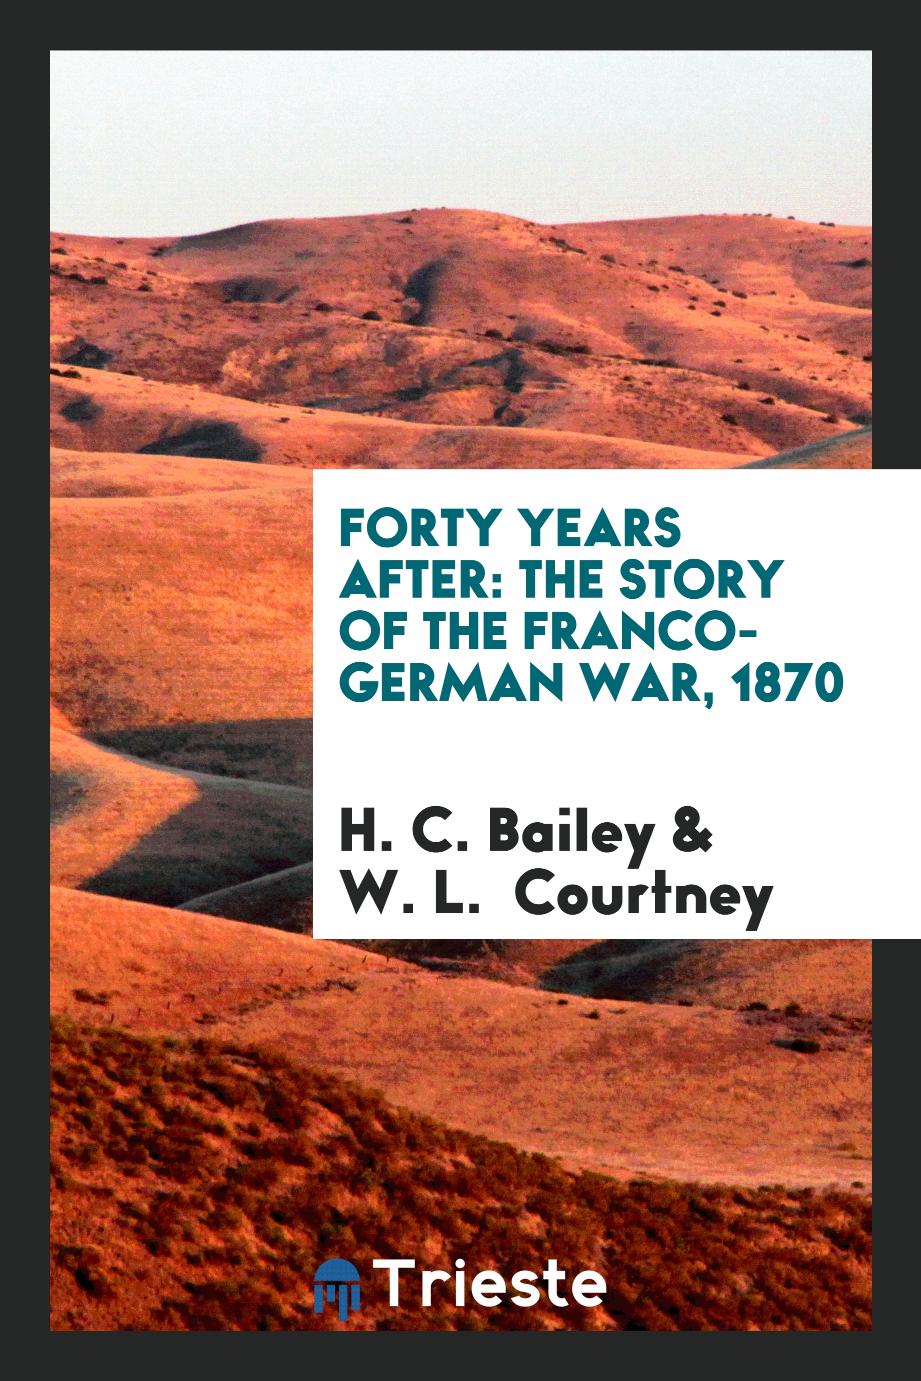 Forty years after: the story of the Franco-German war, 1870